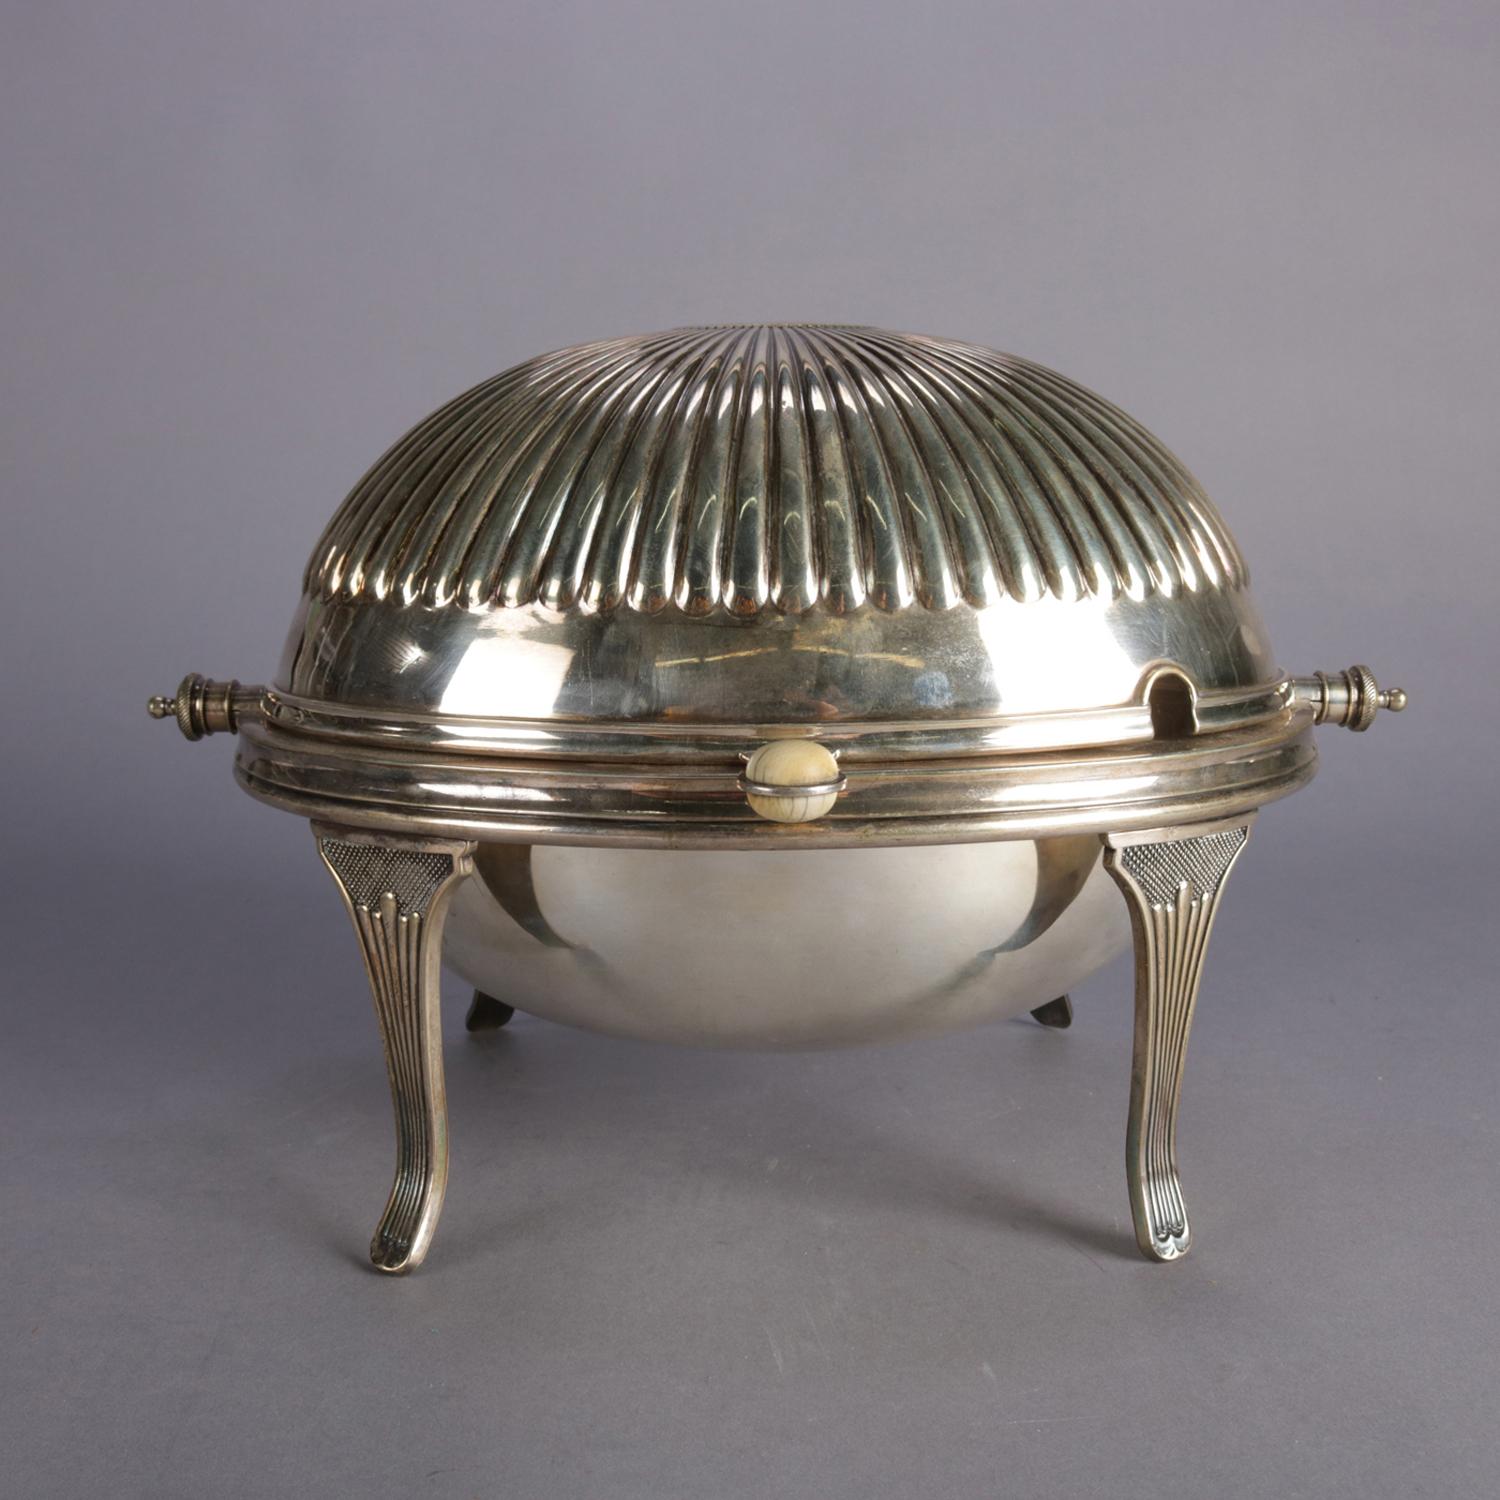 English Georgian formal silver plate serving dish features revolving melon form top with bone handle and is raised on tapered legs, marked on base as photographed, circa 1920.

***DELIVERY NOTICE – Due to COVID-19 we are employing NO-CONTACT